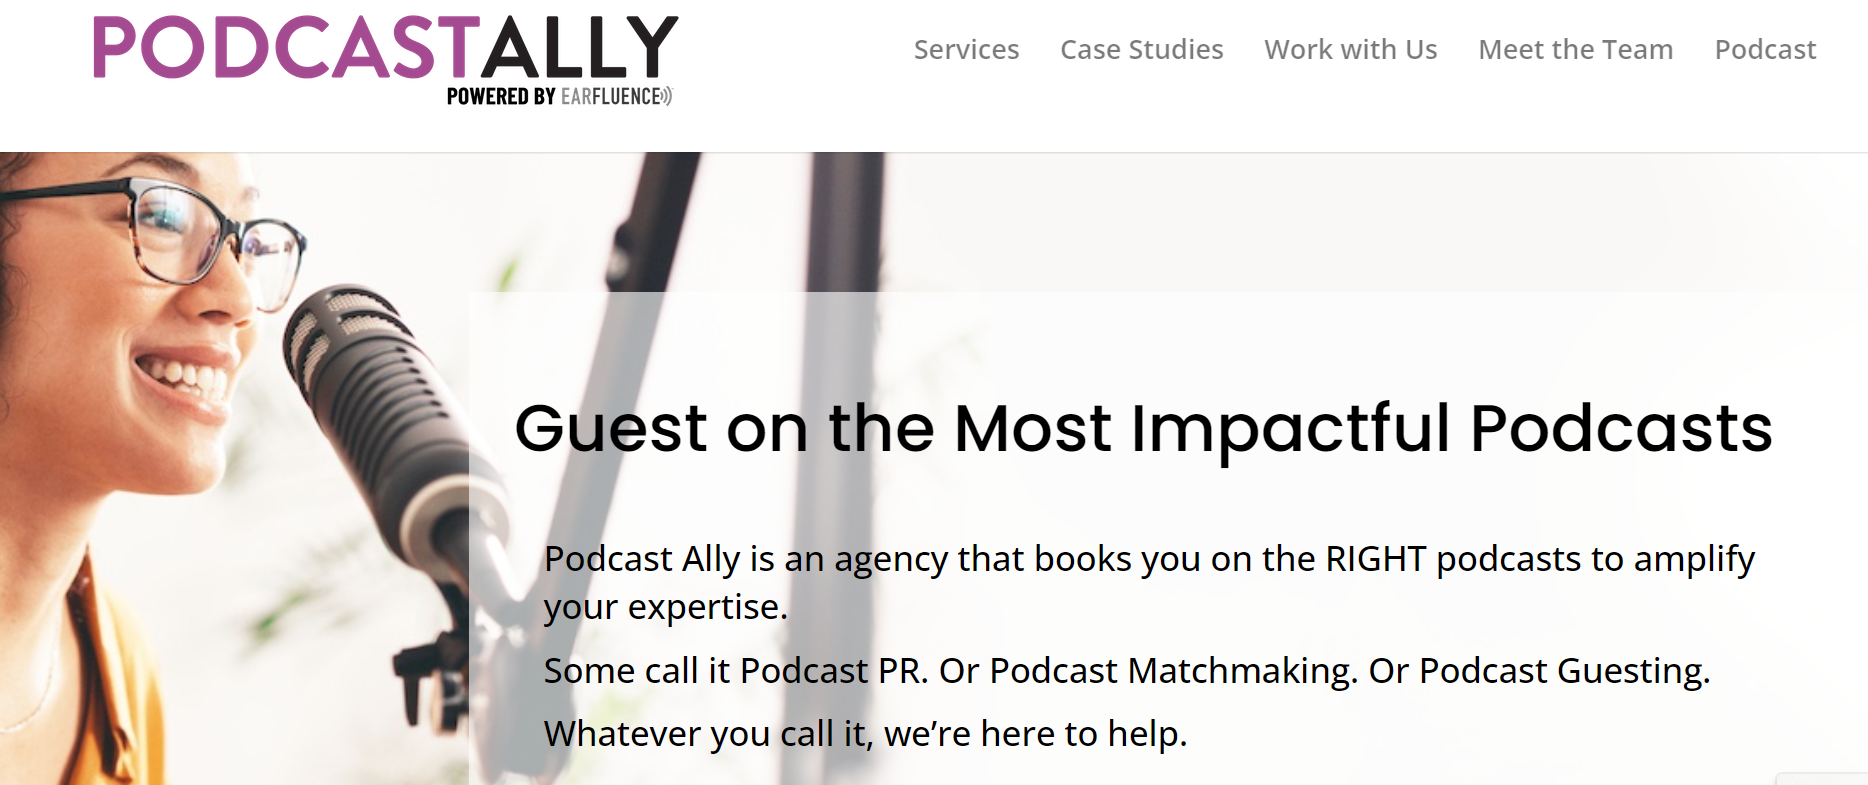 Podcast Ally podcast guest booking agency